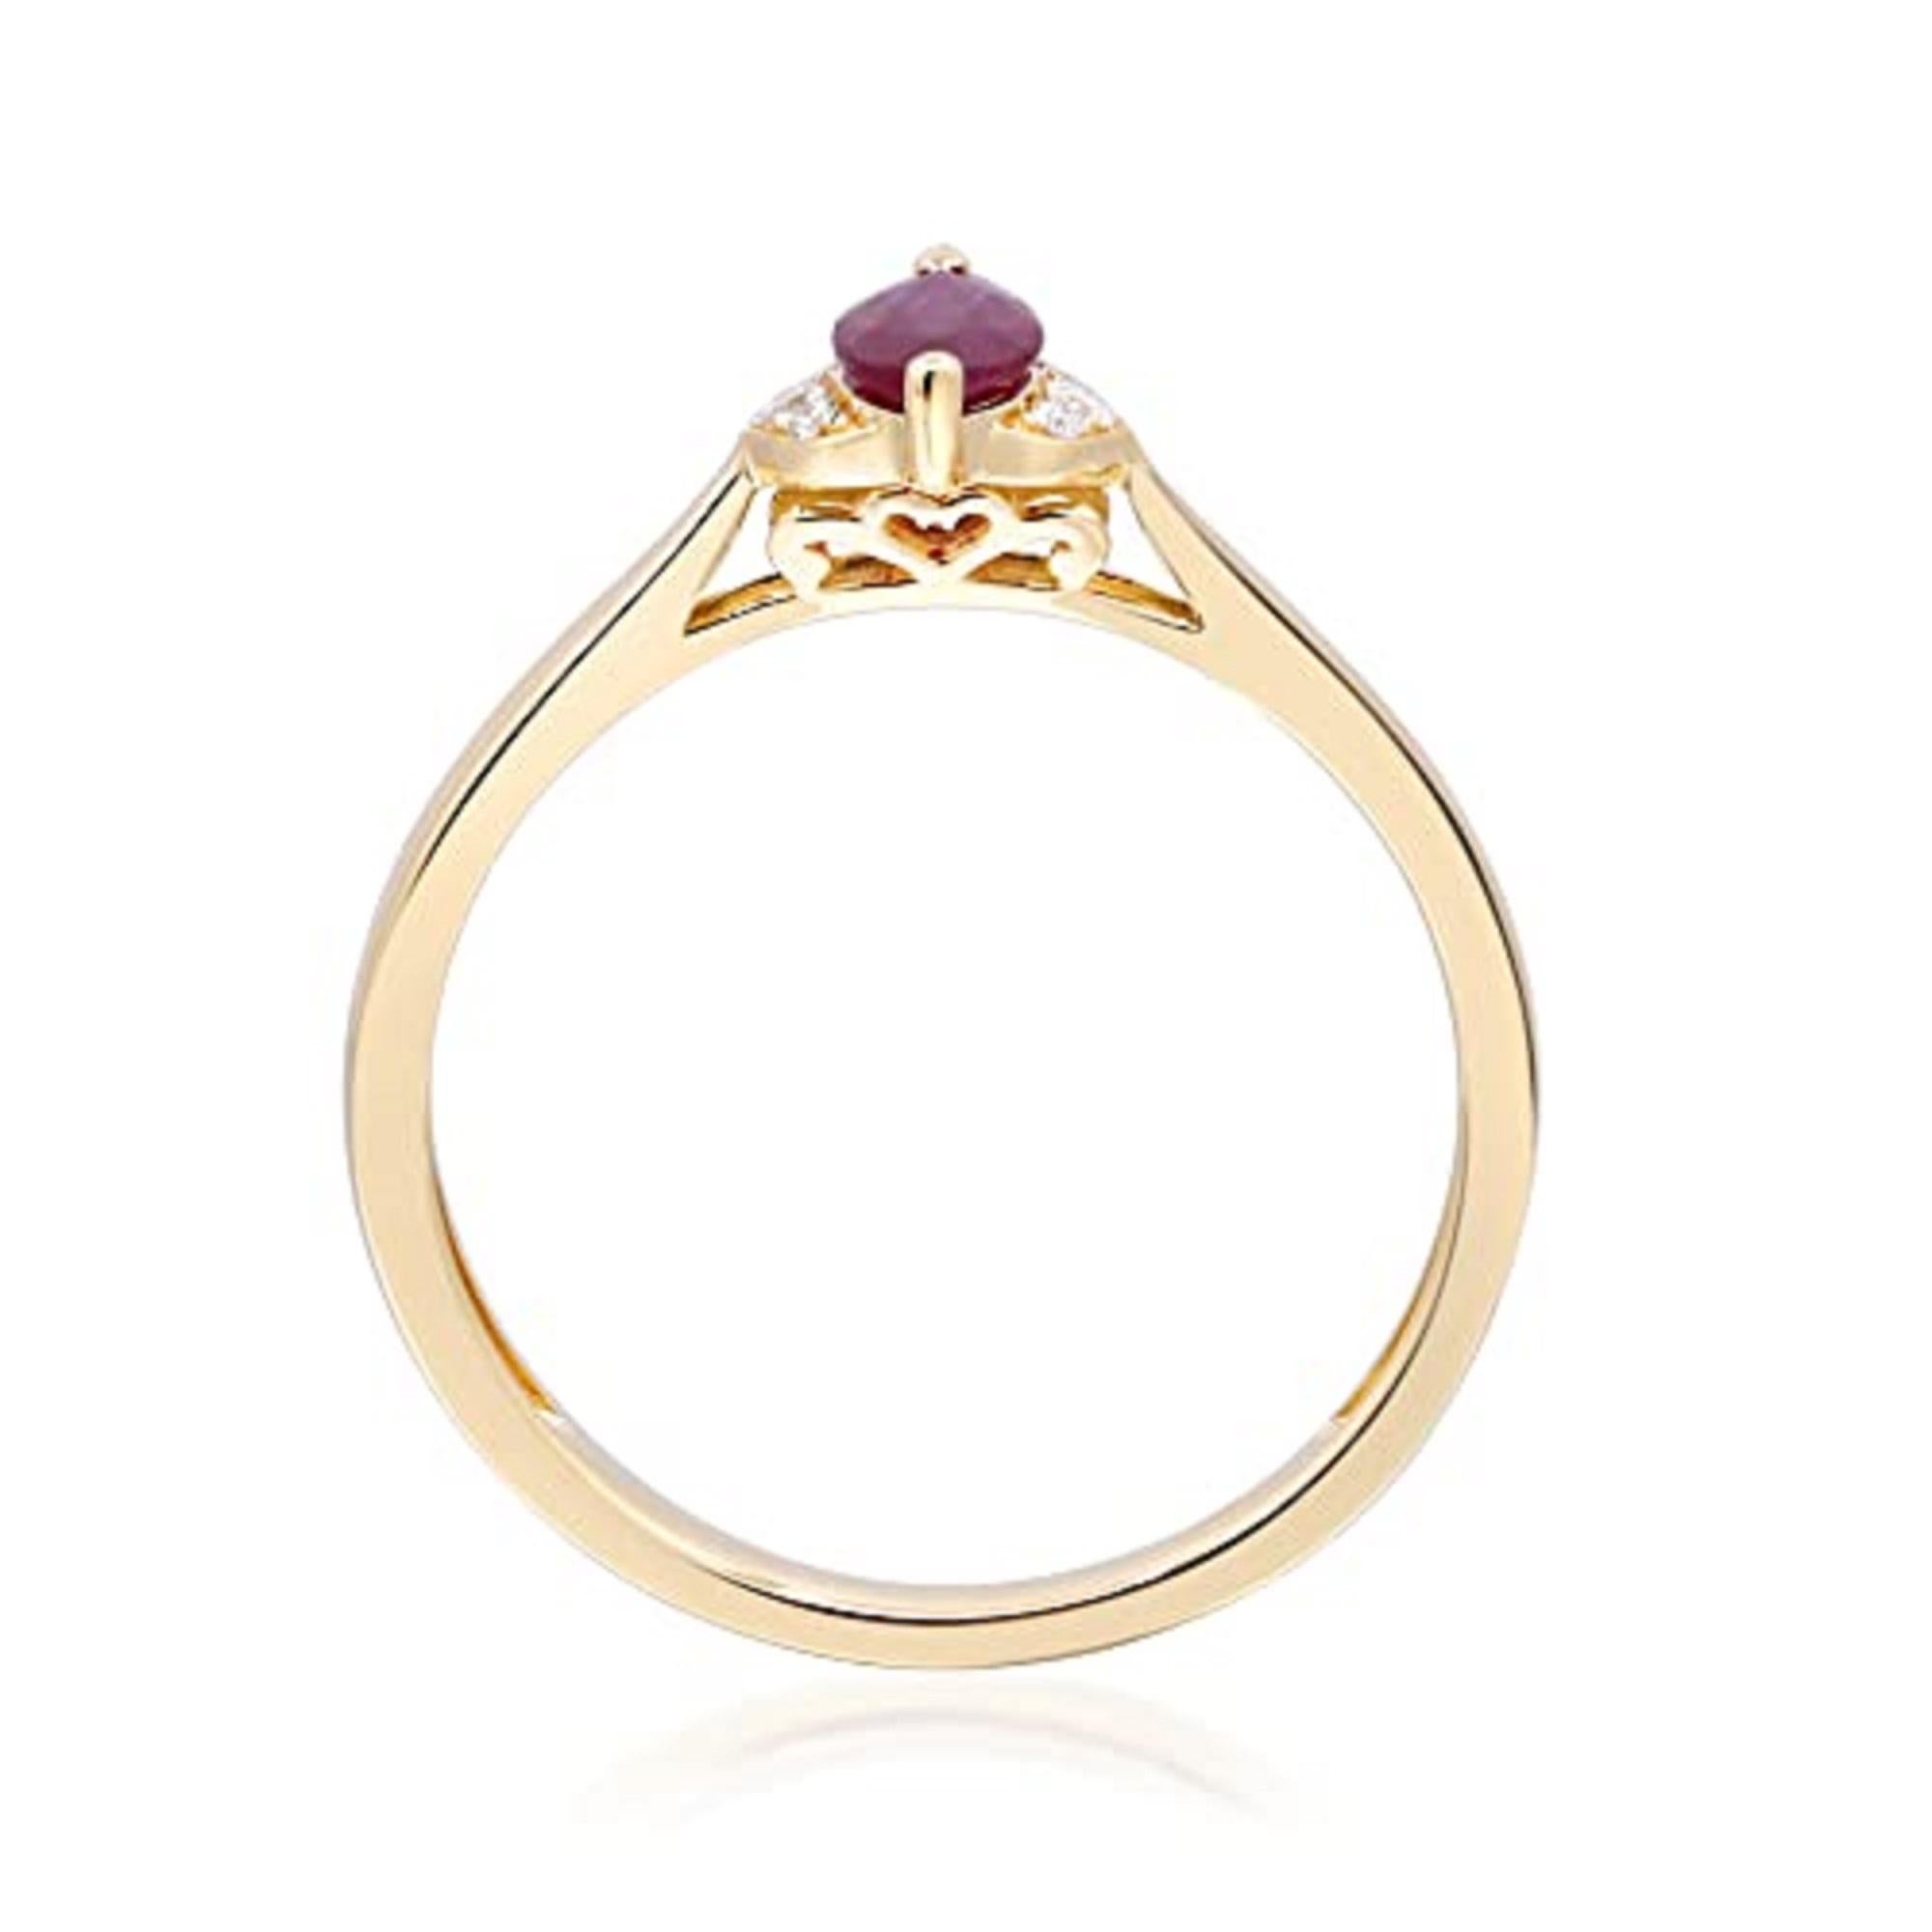 Decorate yourself in elegance with this Ring is crafted from 14-karat Yellow Gold by Gin & Grace. This Ring is made up of 7x3.5 mm Marquise-Cut Ruby (1 pcs) 0.41 carat and Round-cut White Diamond (6 Pcs) 0.03 Carat. This Ring is weight 1.44 grams.